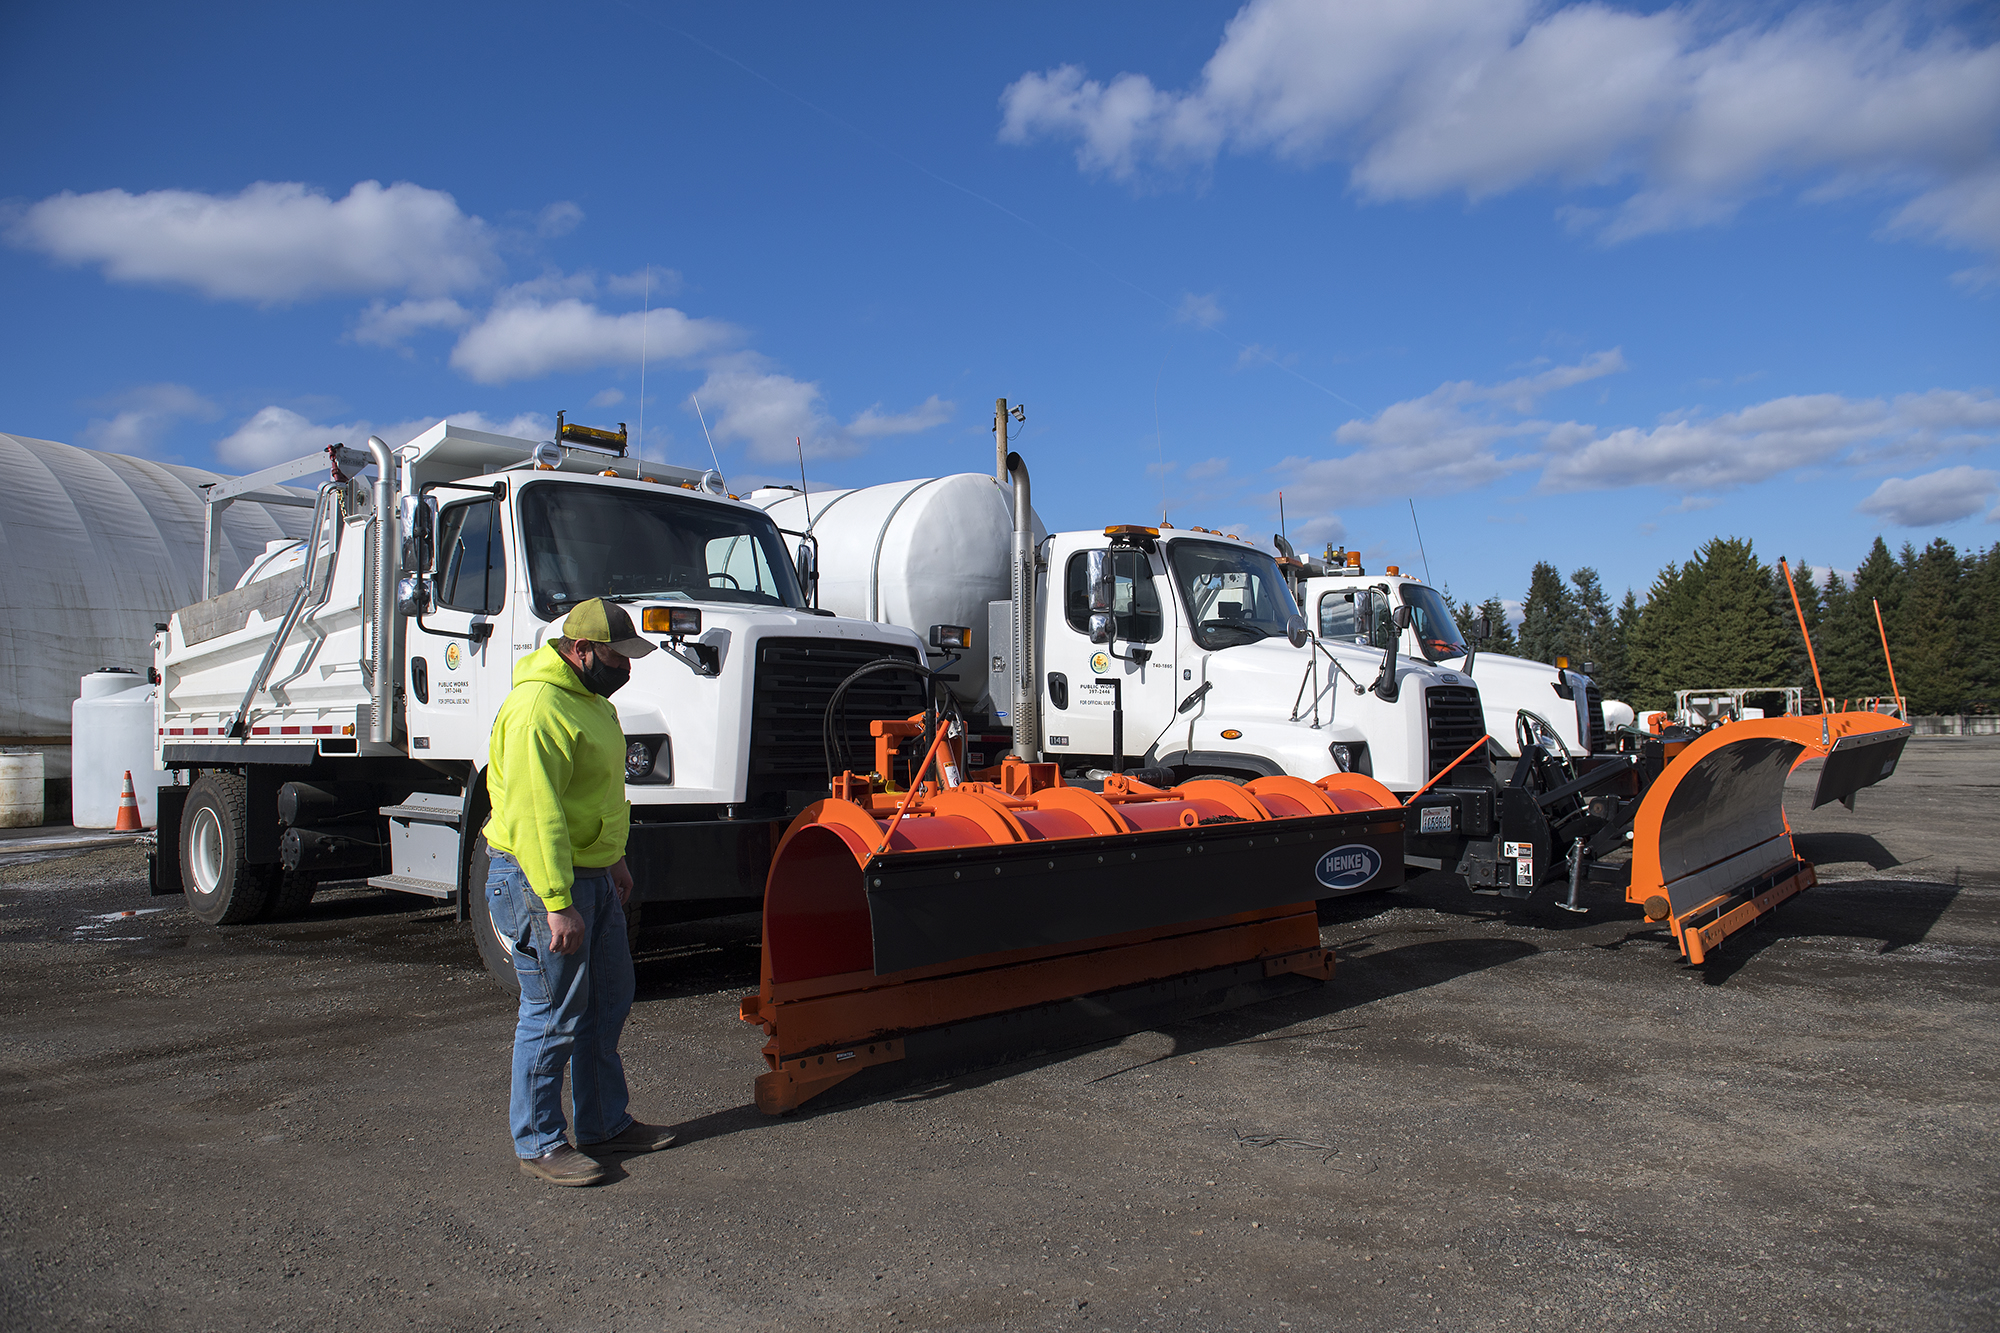 LEADOPTION Richard Harris of the Clark County Public Works Department walks past trucks used for plowing and deicing streets as crews get ready for the possibility of snow accumulation Wednesday afternoon, Feb. 10, 2021.